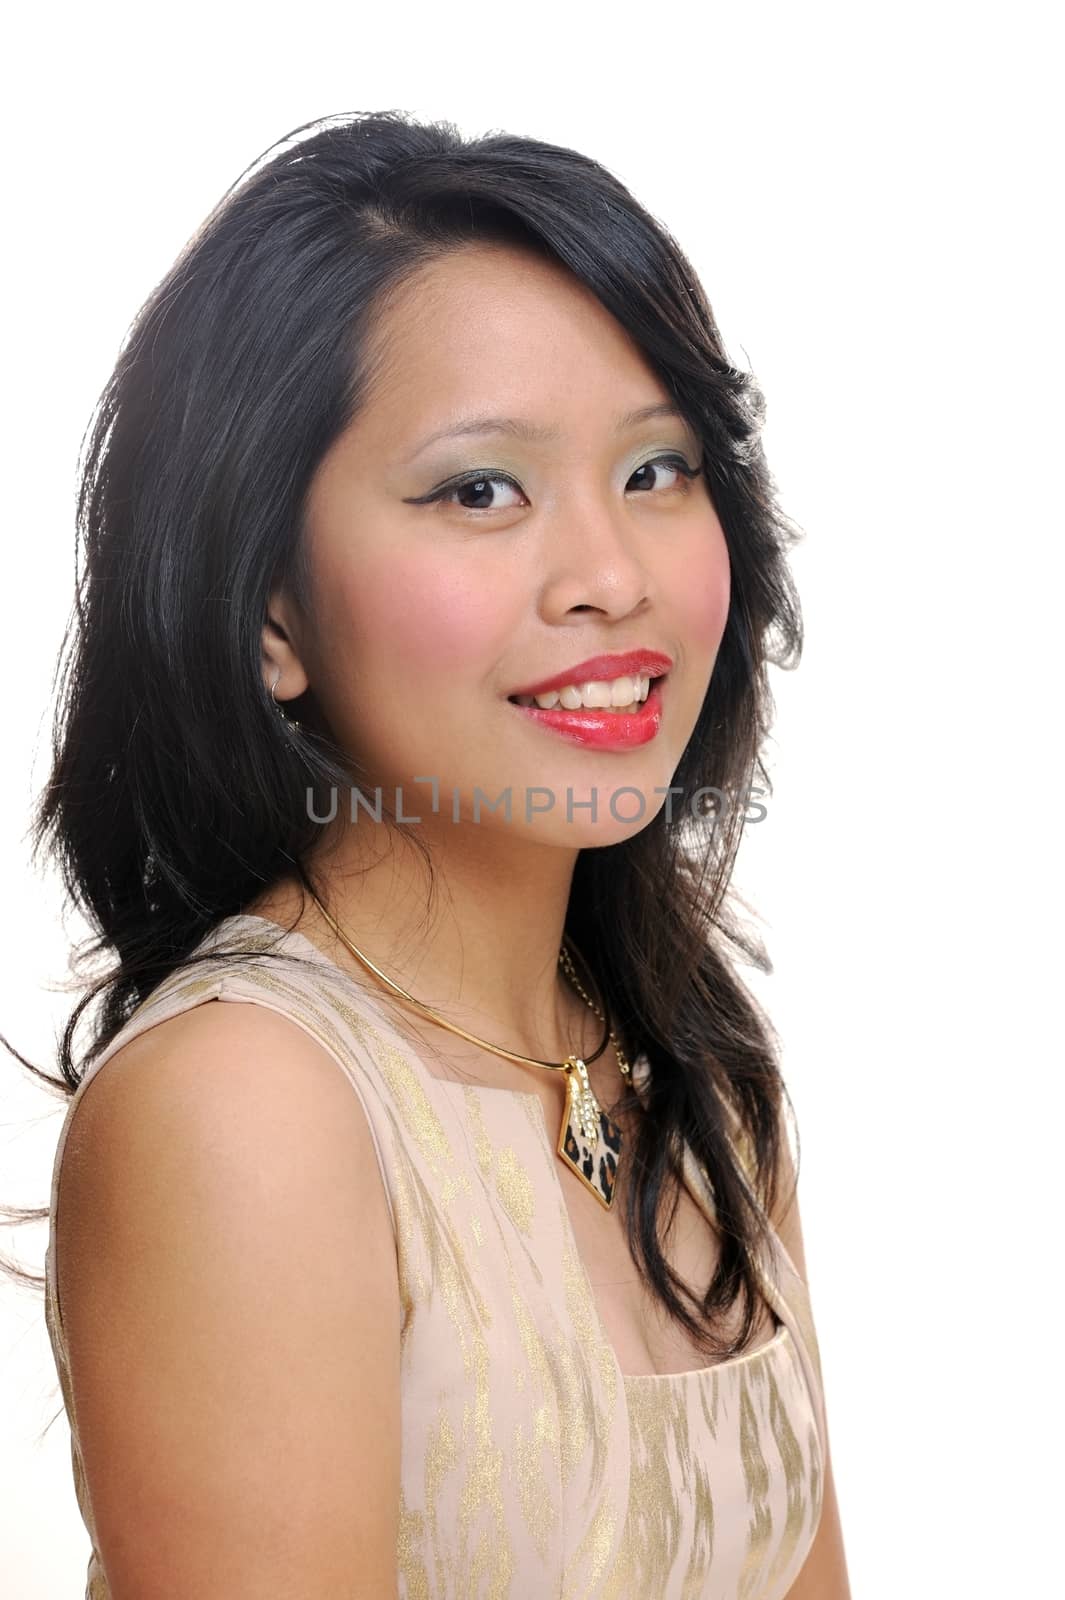 Asian girl smiling and looking happy wearing makeup